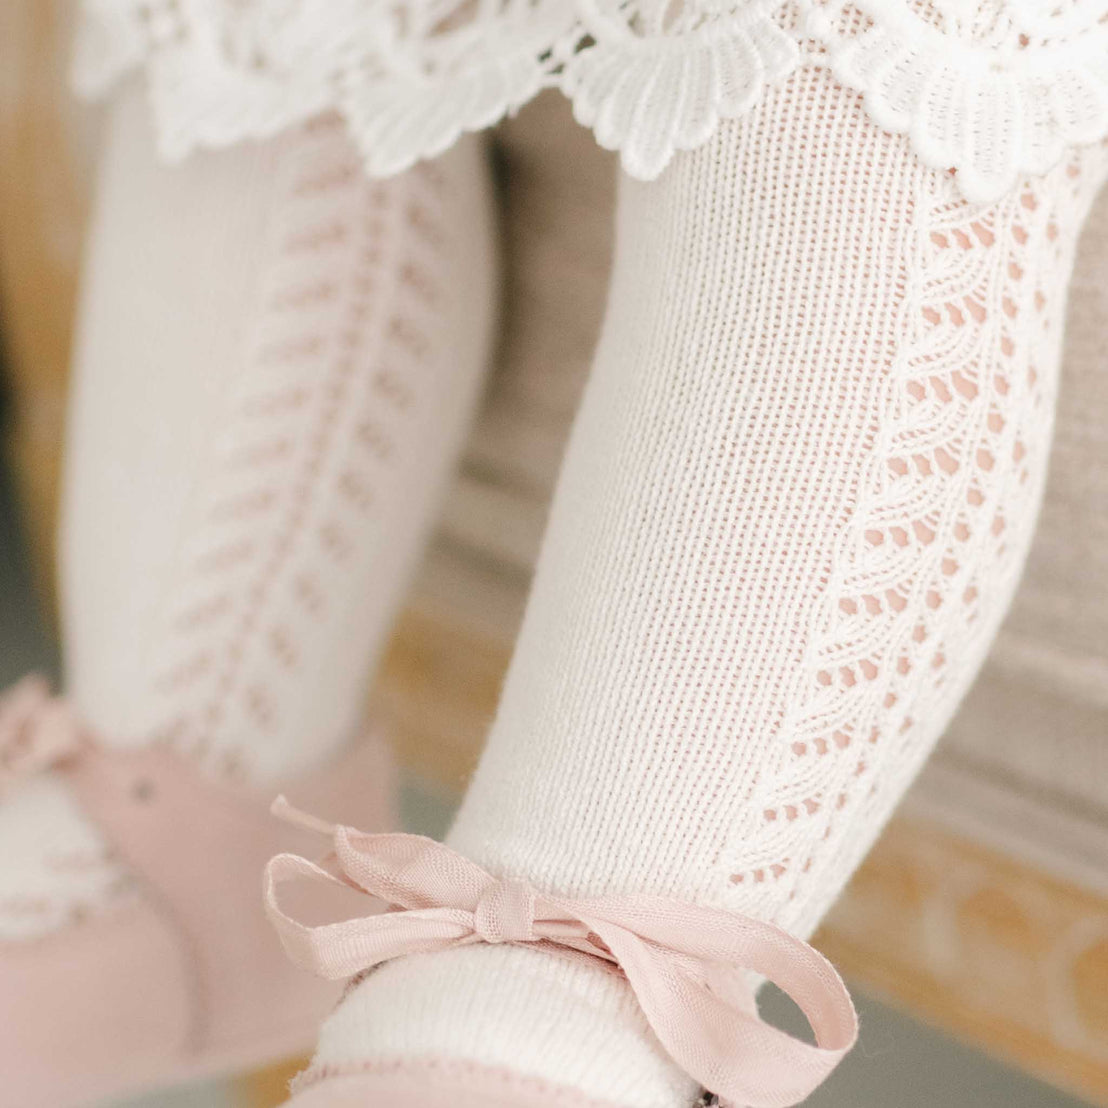 Close-up of a child's legs wearing white lace-trimmed Side Openwork Tights with pink bows, suggesting a christening or baptism.